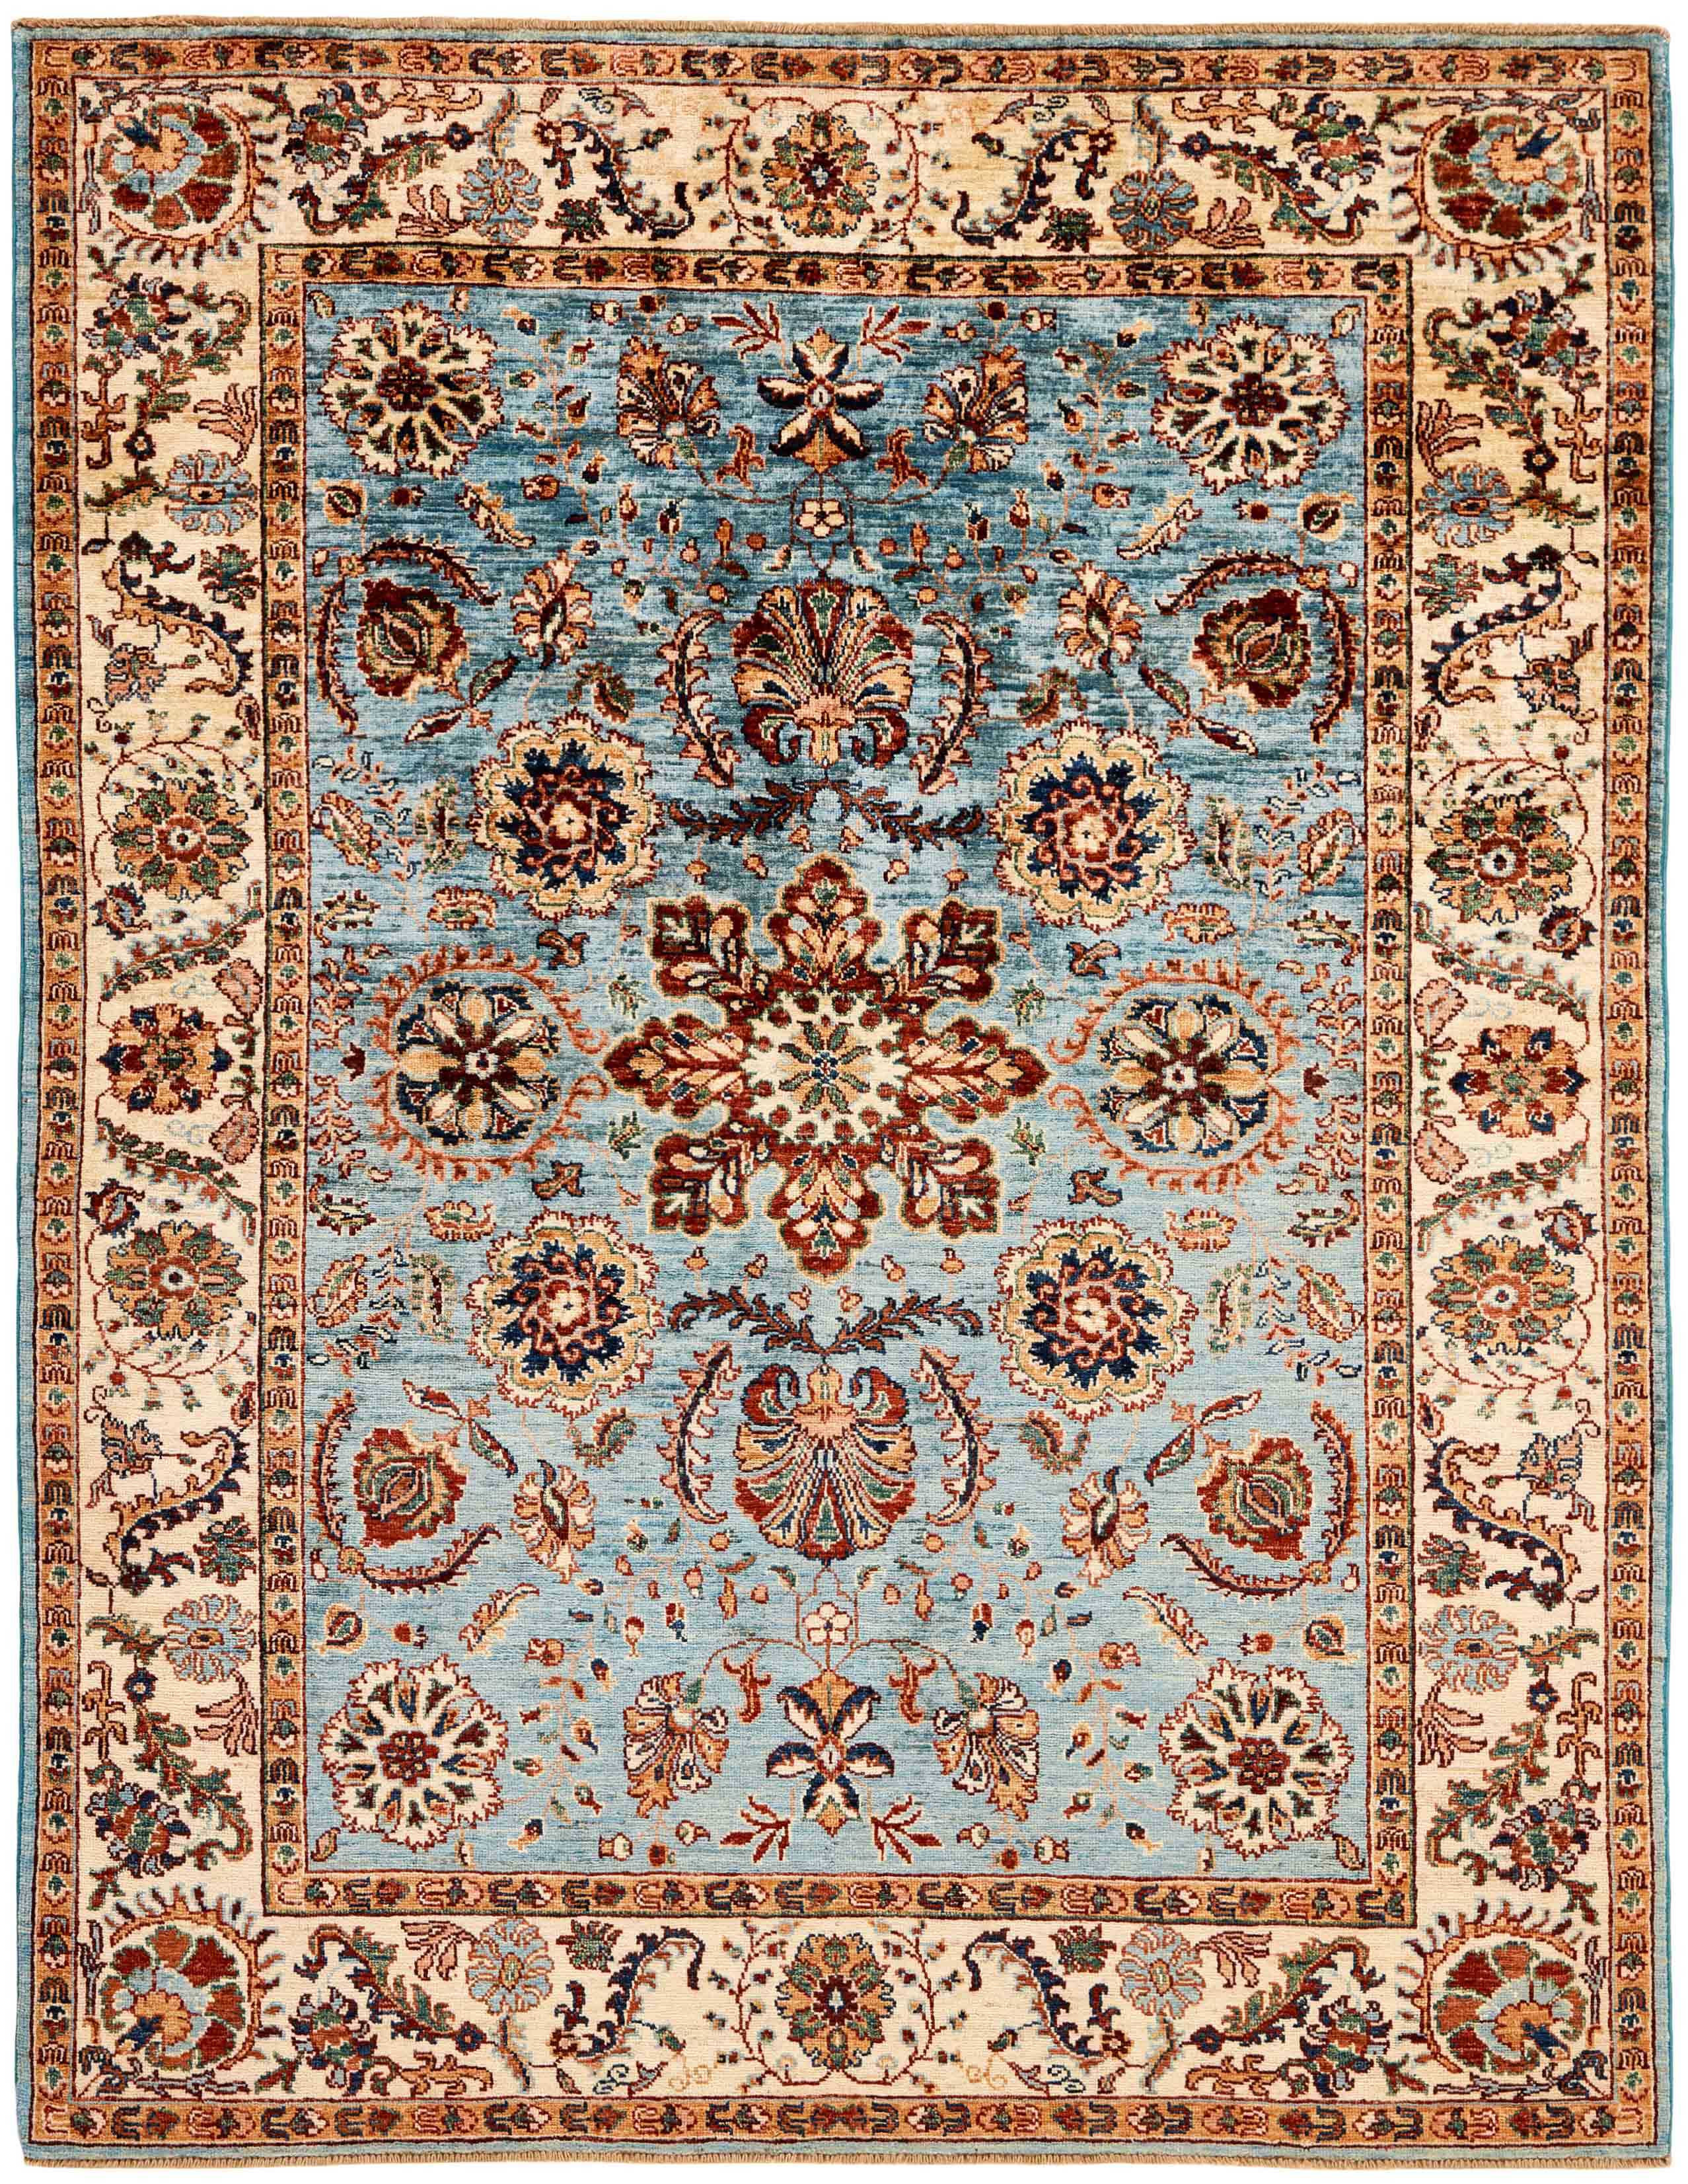 oriental rug with red, yellow, blue, green and beige floral pattern